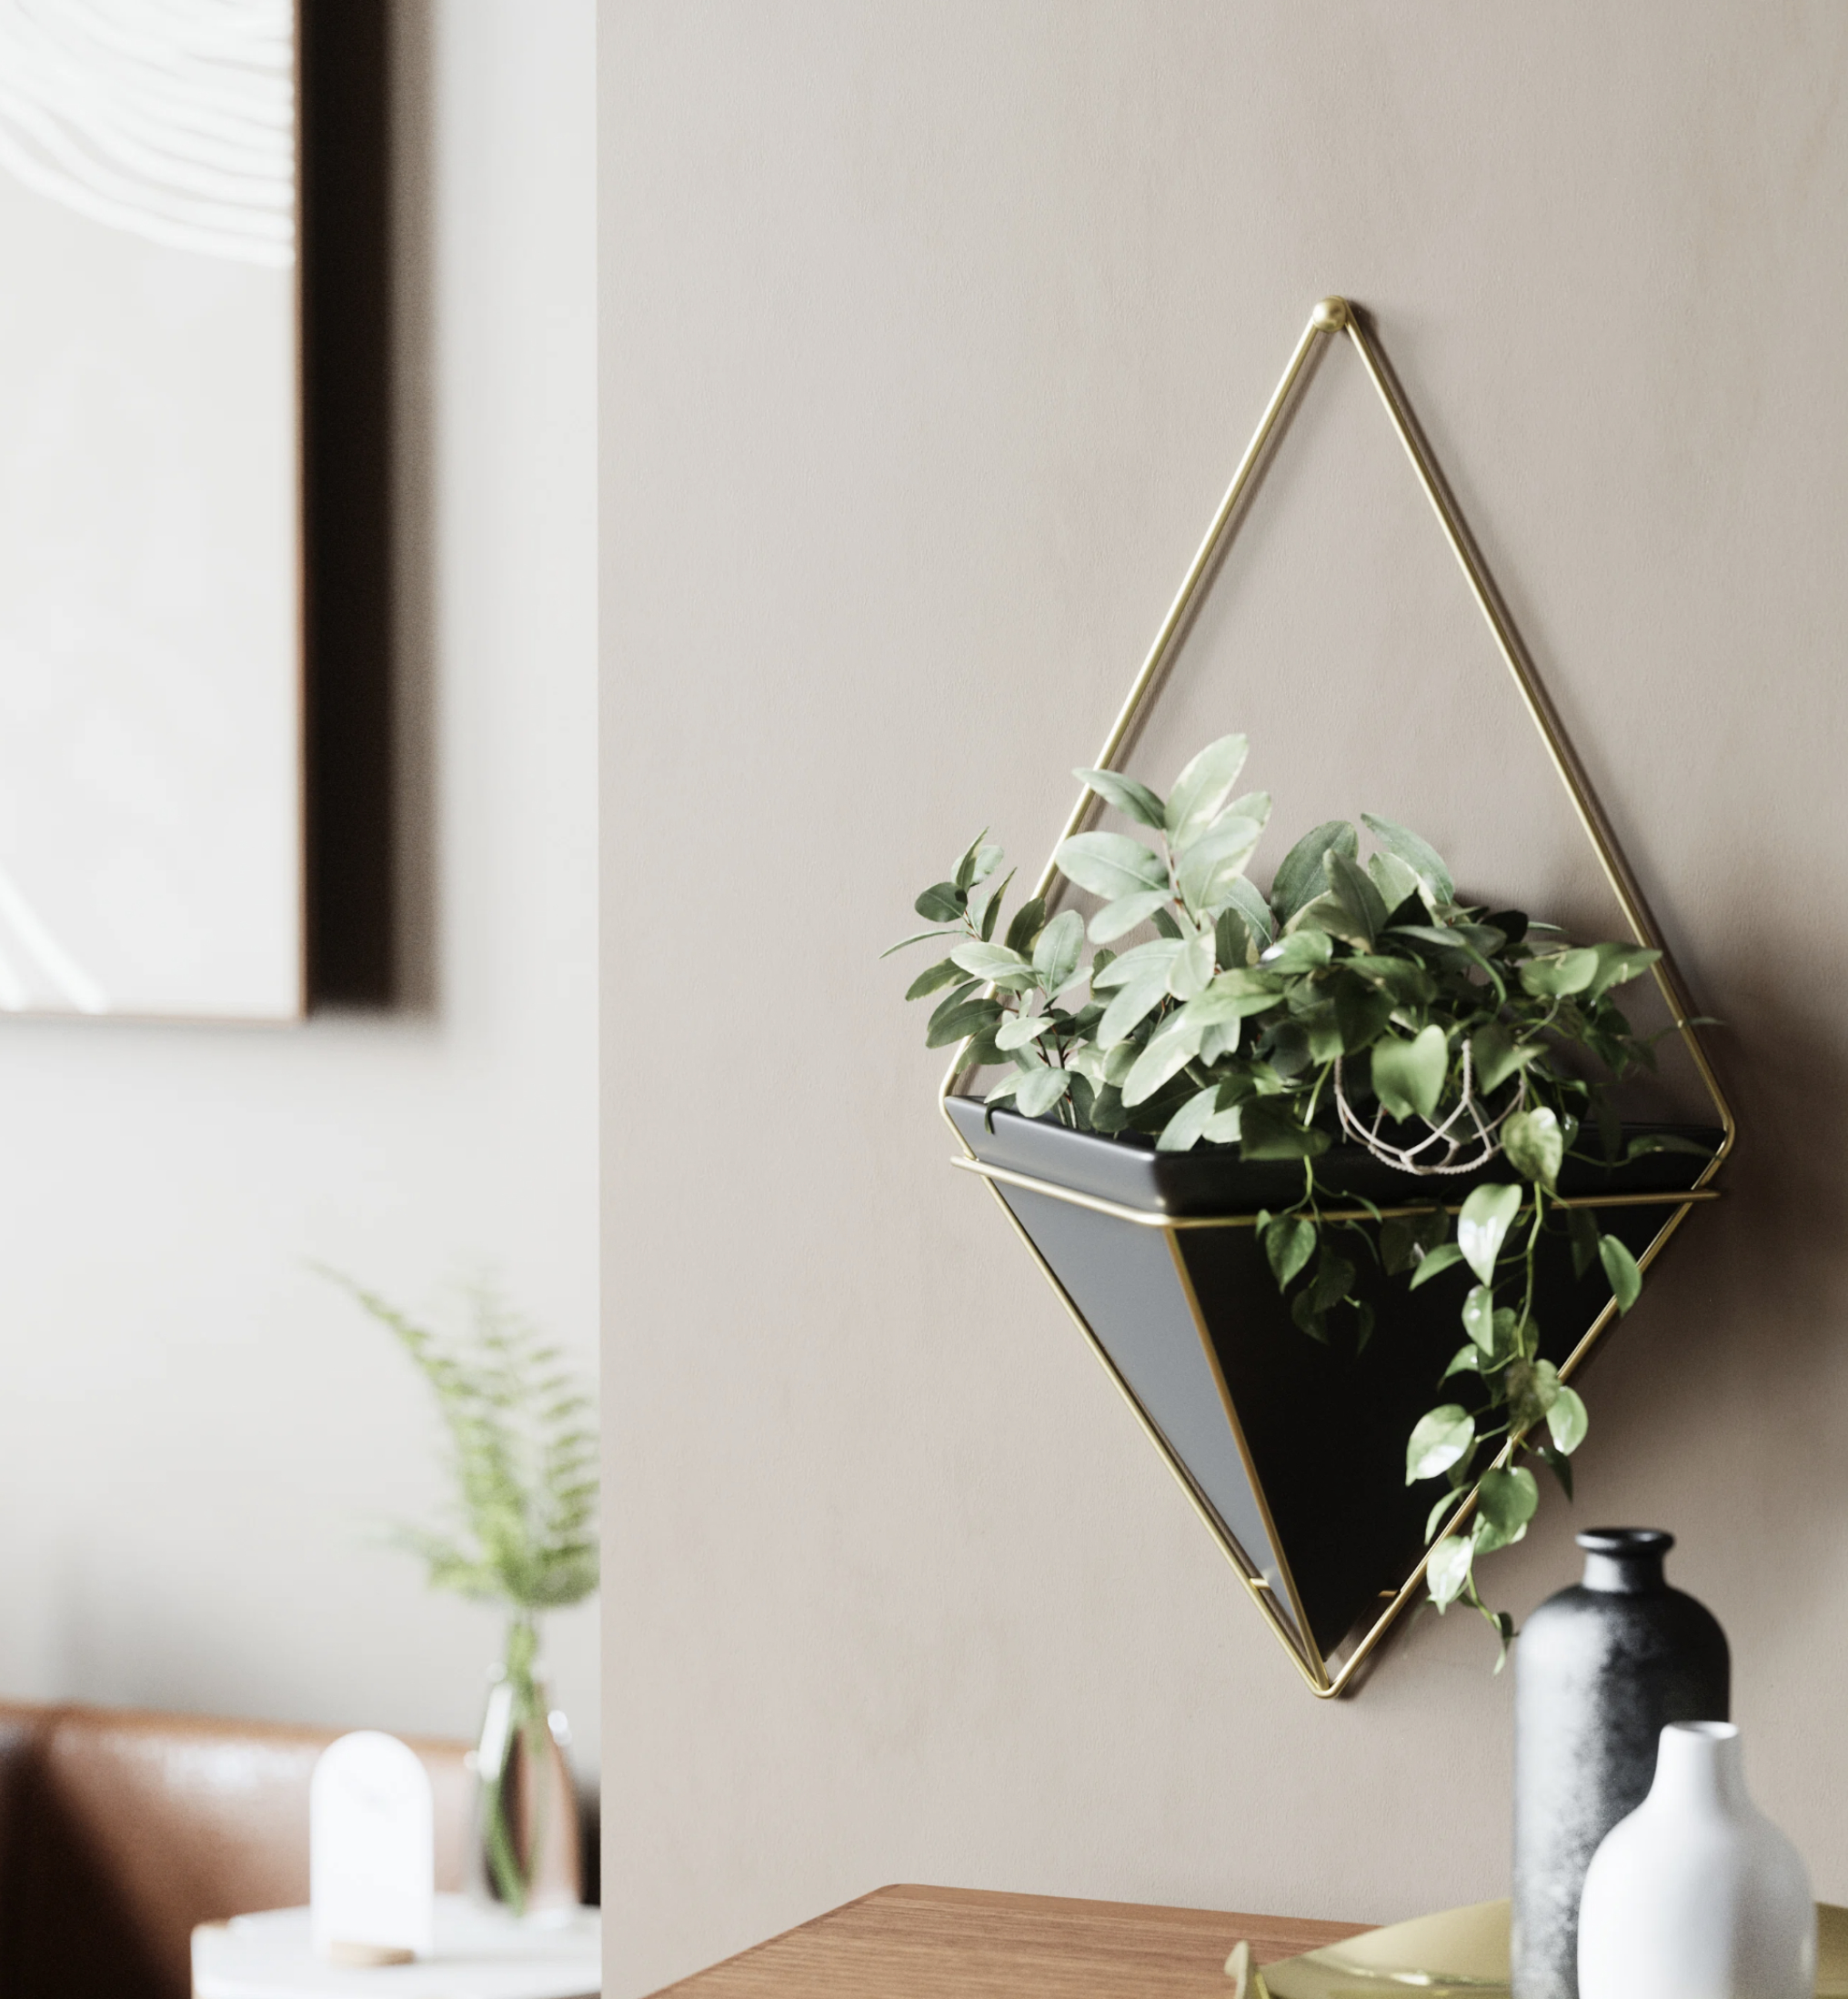 Geometric wall-mounted planter with cascading foliage, hung beside artwork